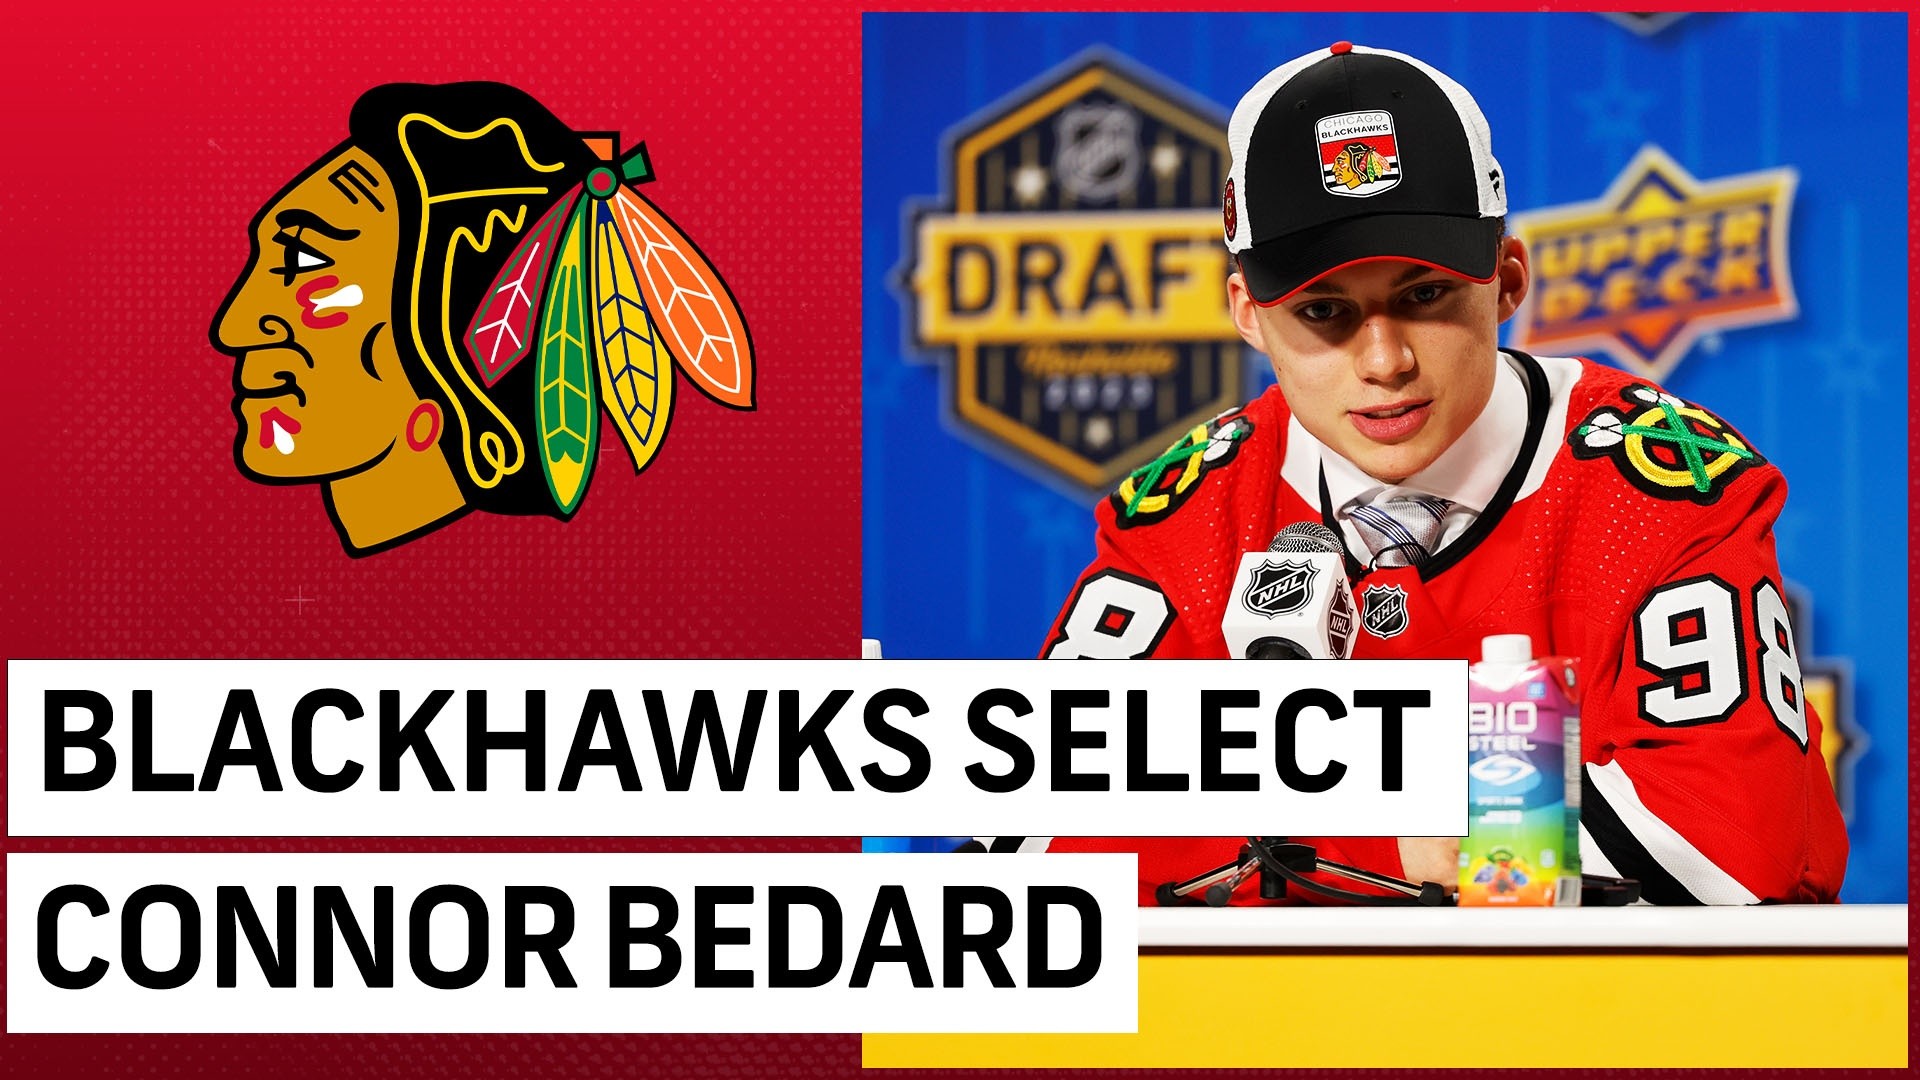 Connor Bedard Selected No. 1 in NHL Draft by Blackhawks